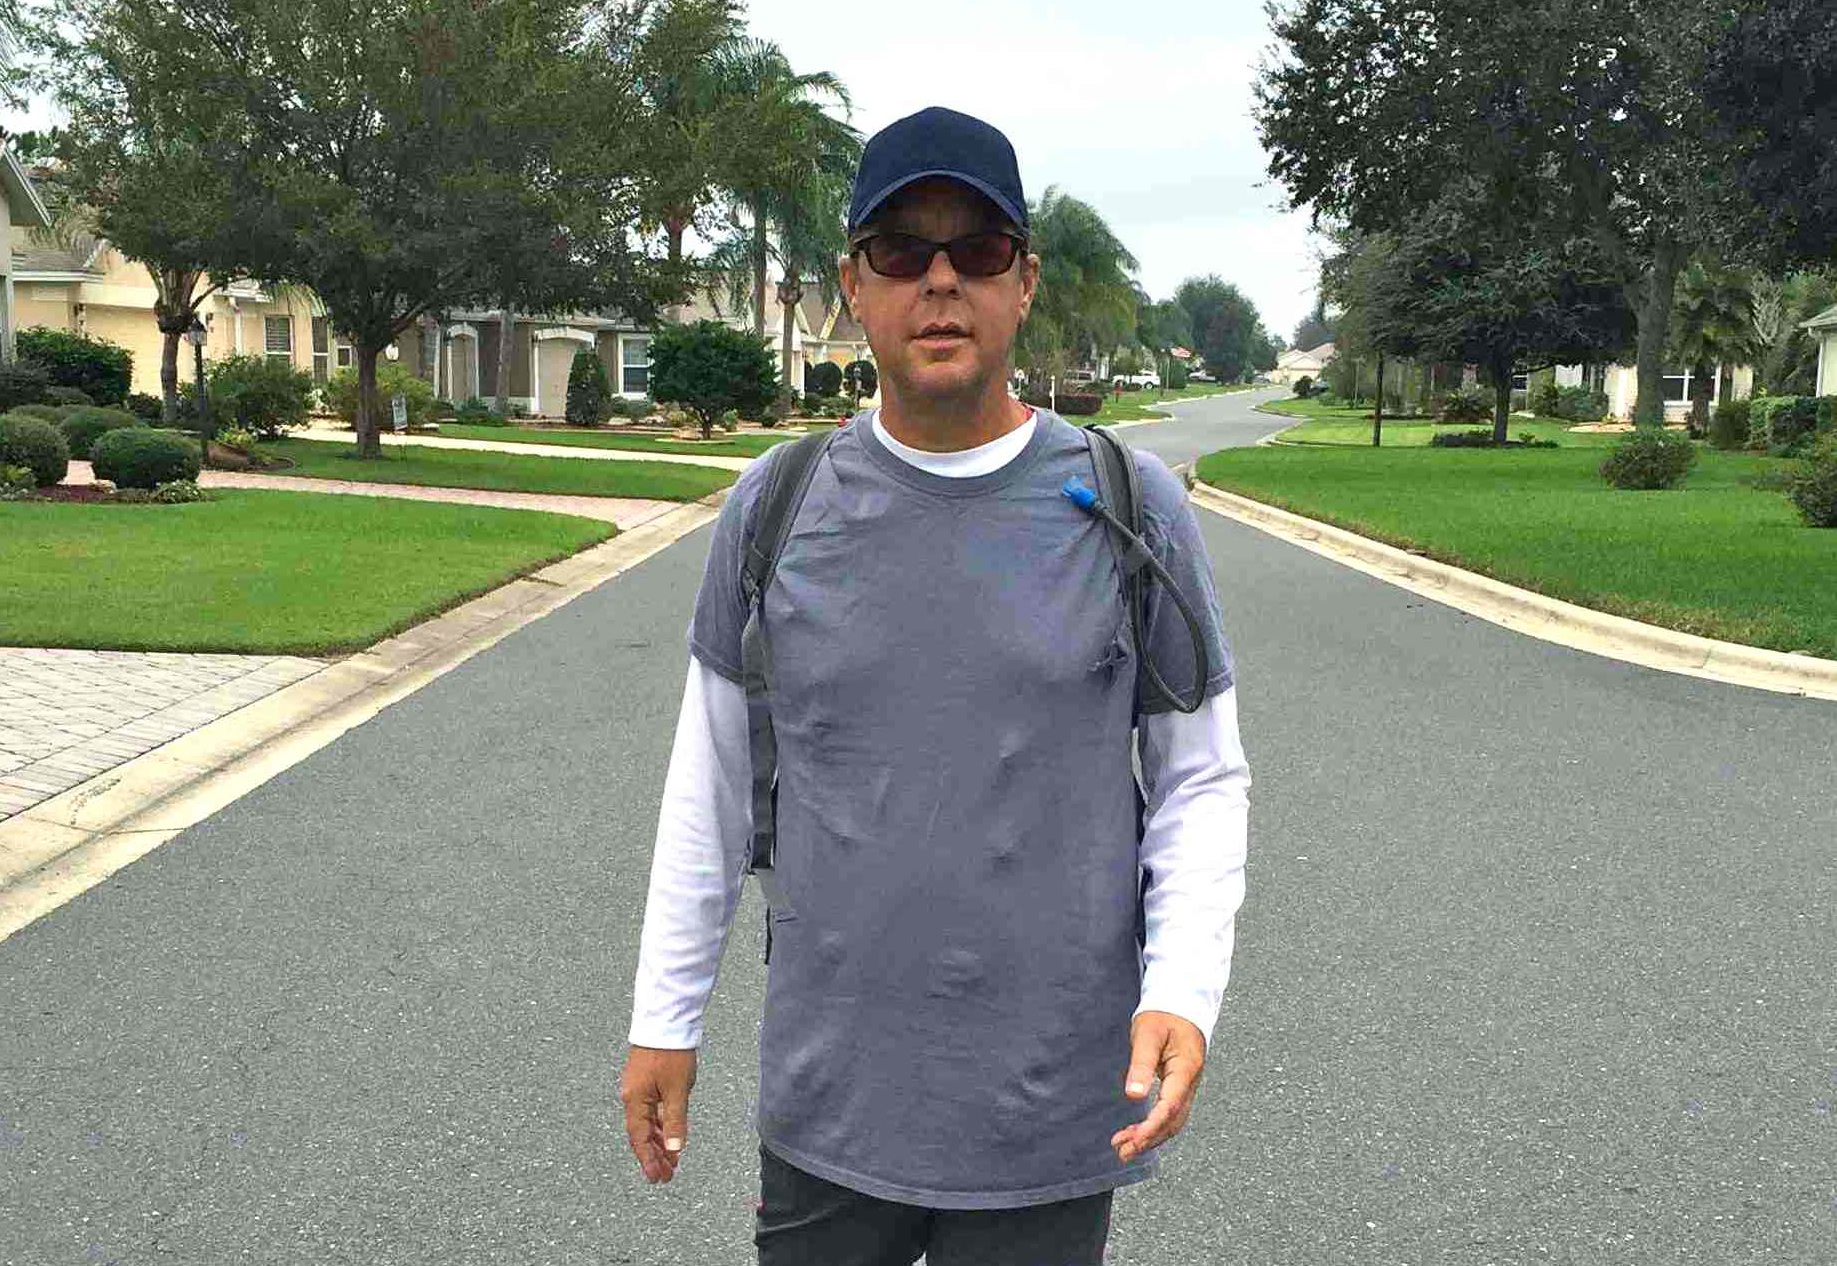 Thankful for a second chance, man embarks on daily ‘Lazarus Walk’